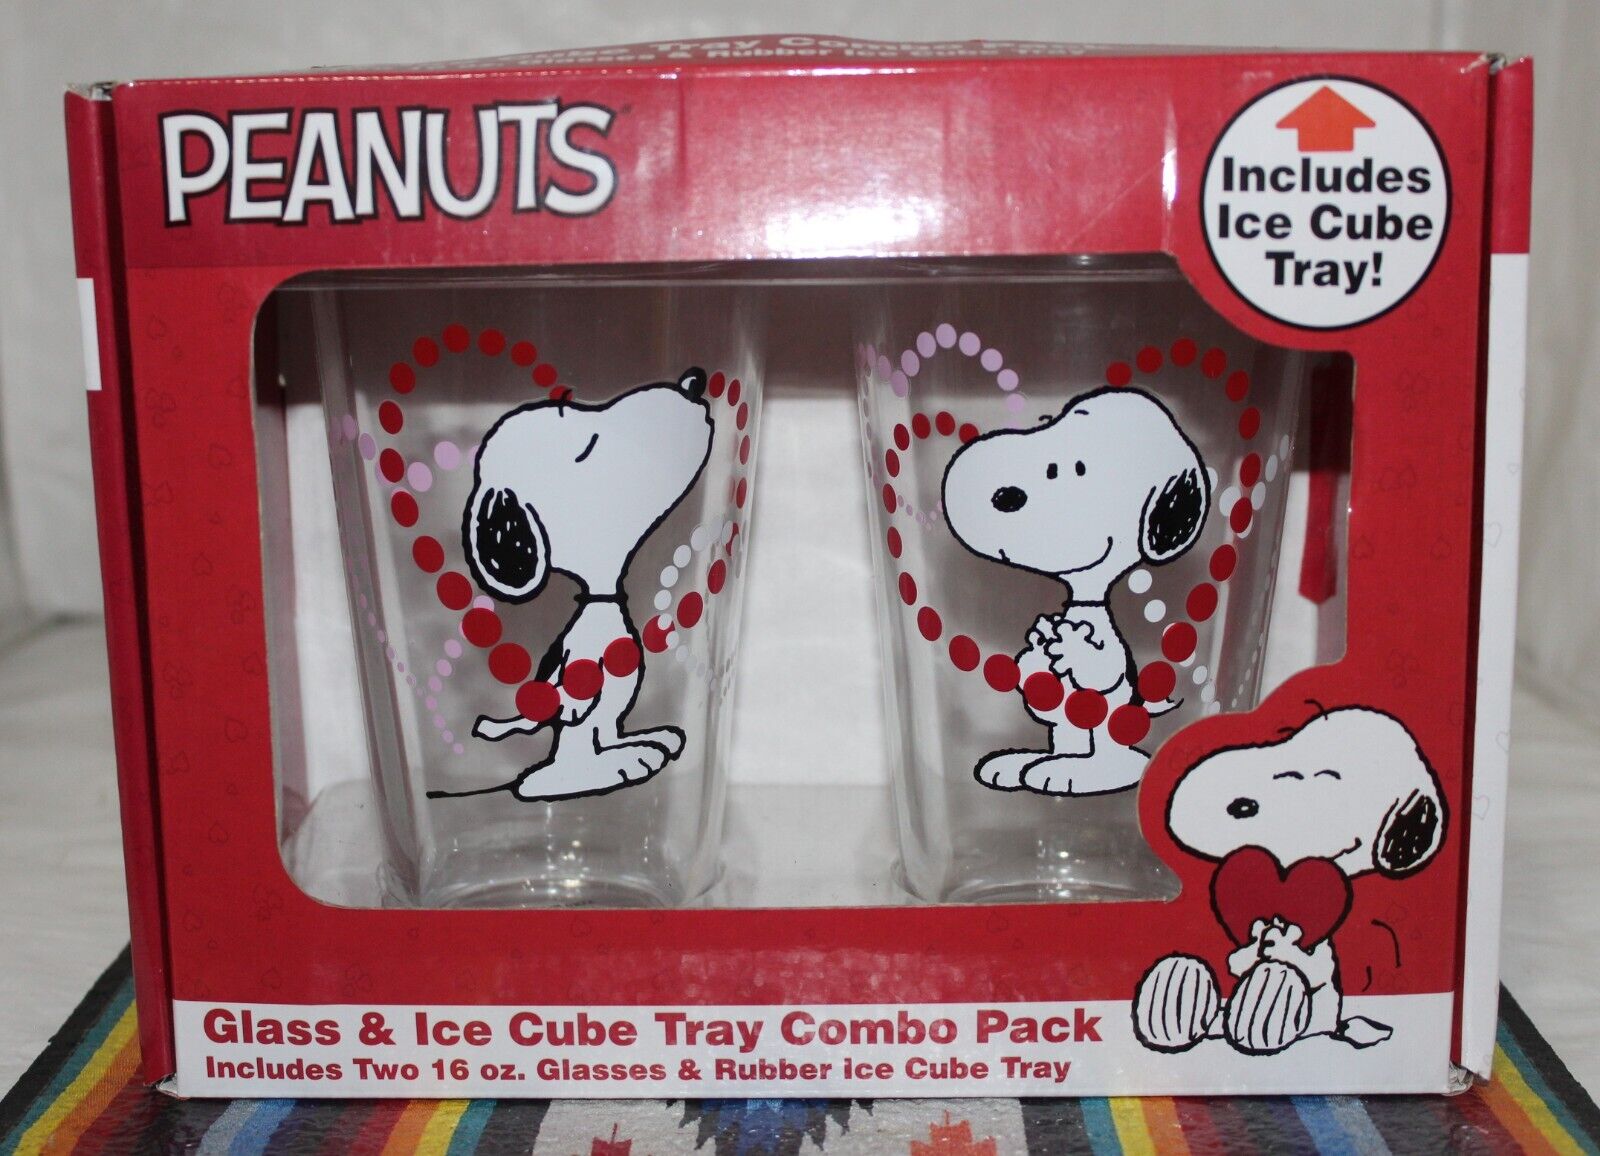 Peanuts Snoopy Valentine\'s Day Pint Glasses Set of 2 with Ice Cube Tray Combo